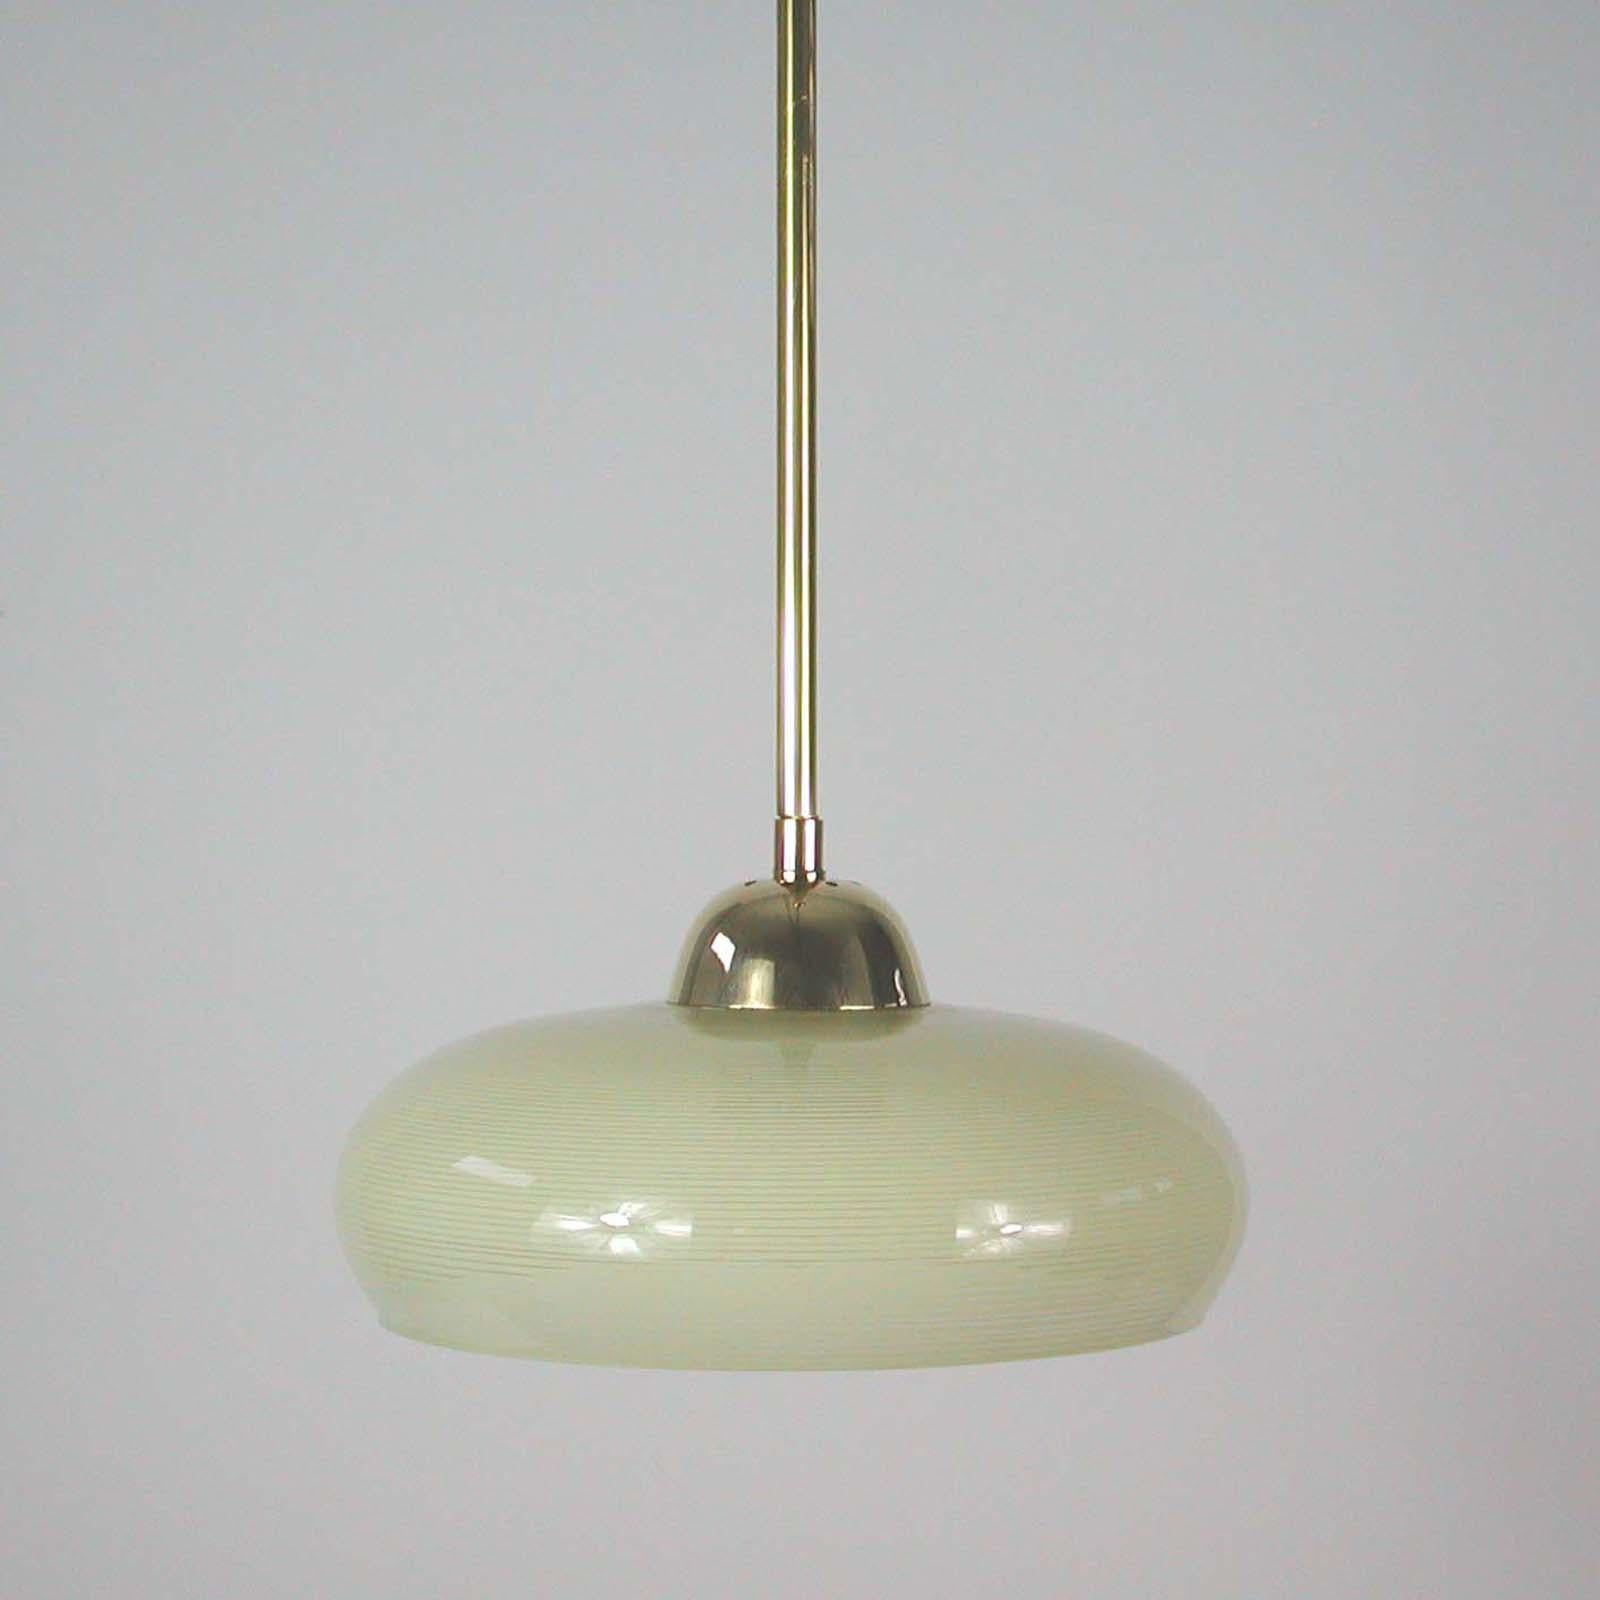 This elegant German pendant was designed and manufactured in Germany in the 1930s. The light is made of brass and has got a cream colored opaline glass shade in typical Bauhaus Design with striped glass decor. Good vintage condition with one E27